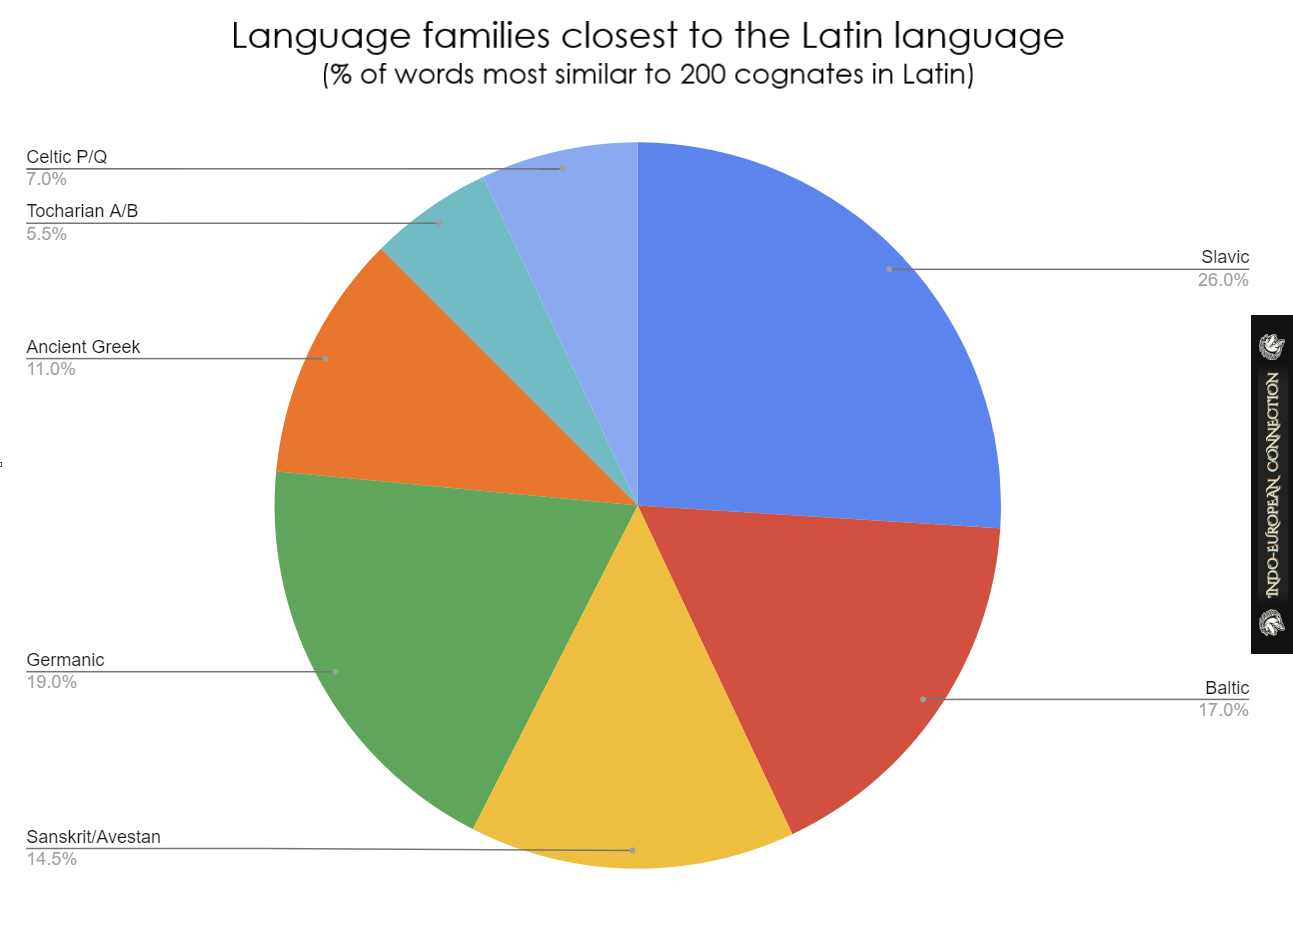 Indo-European language families closest to the Latin language with results of 200 cognates shown on pie chart with following results SSlavic: 26%; Baltic: 17%; Sanskrit/Avestan: 14.5%; Germanic: 19%; Ancient Greek: 11%; Tocharian A/B: 5.5%; Celtic P/Q: 7%